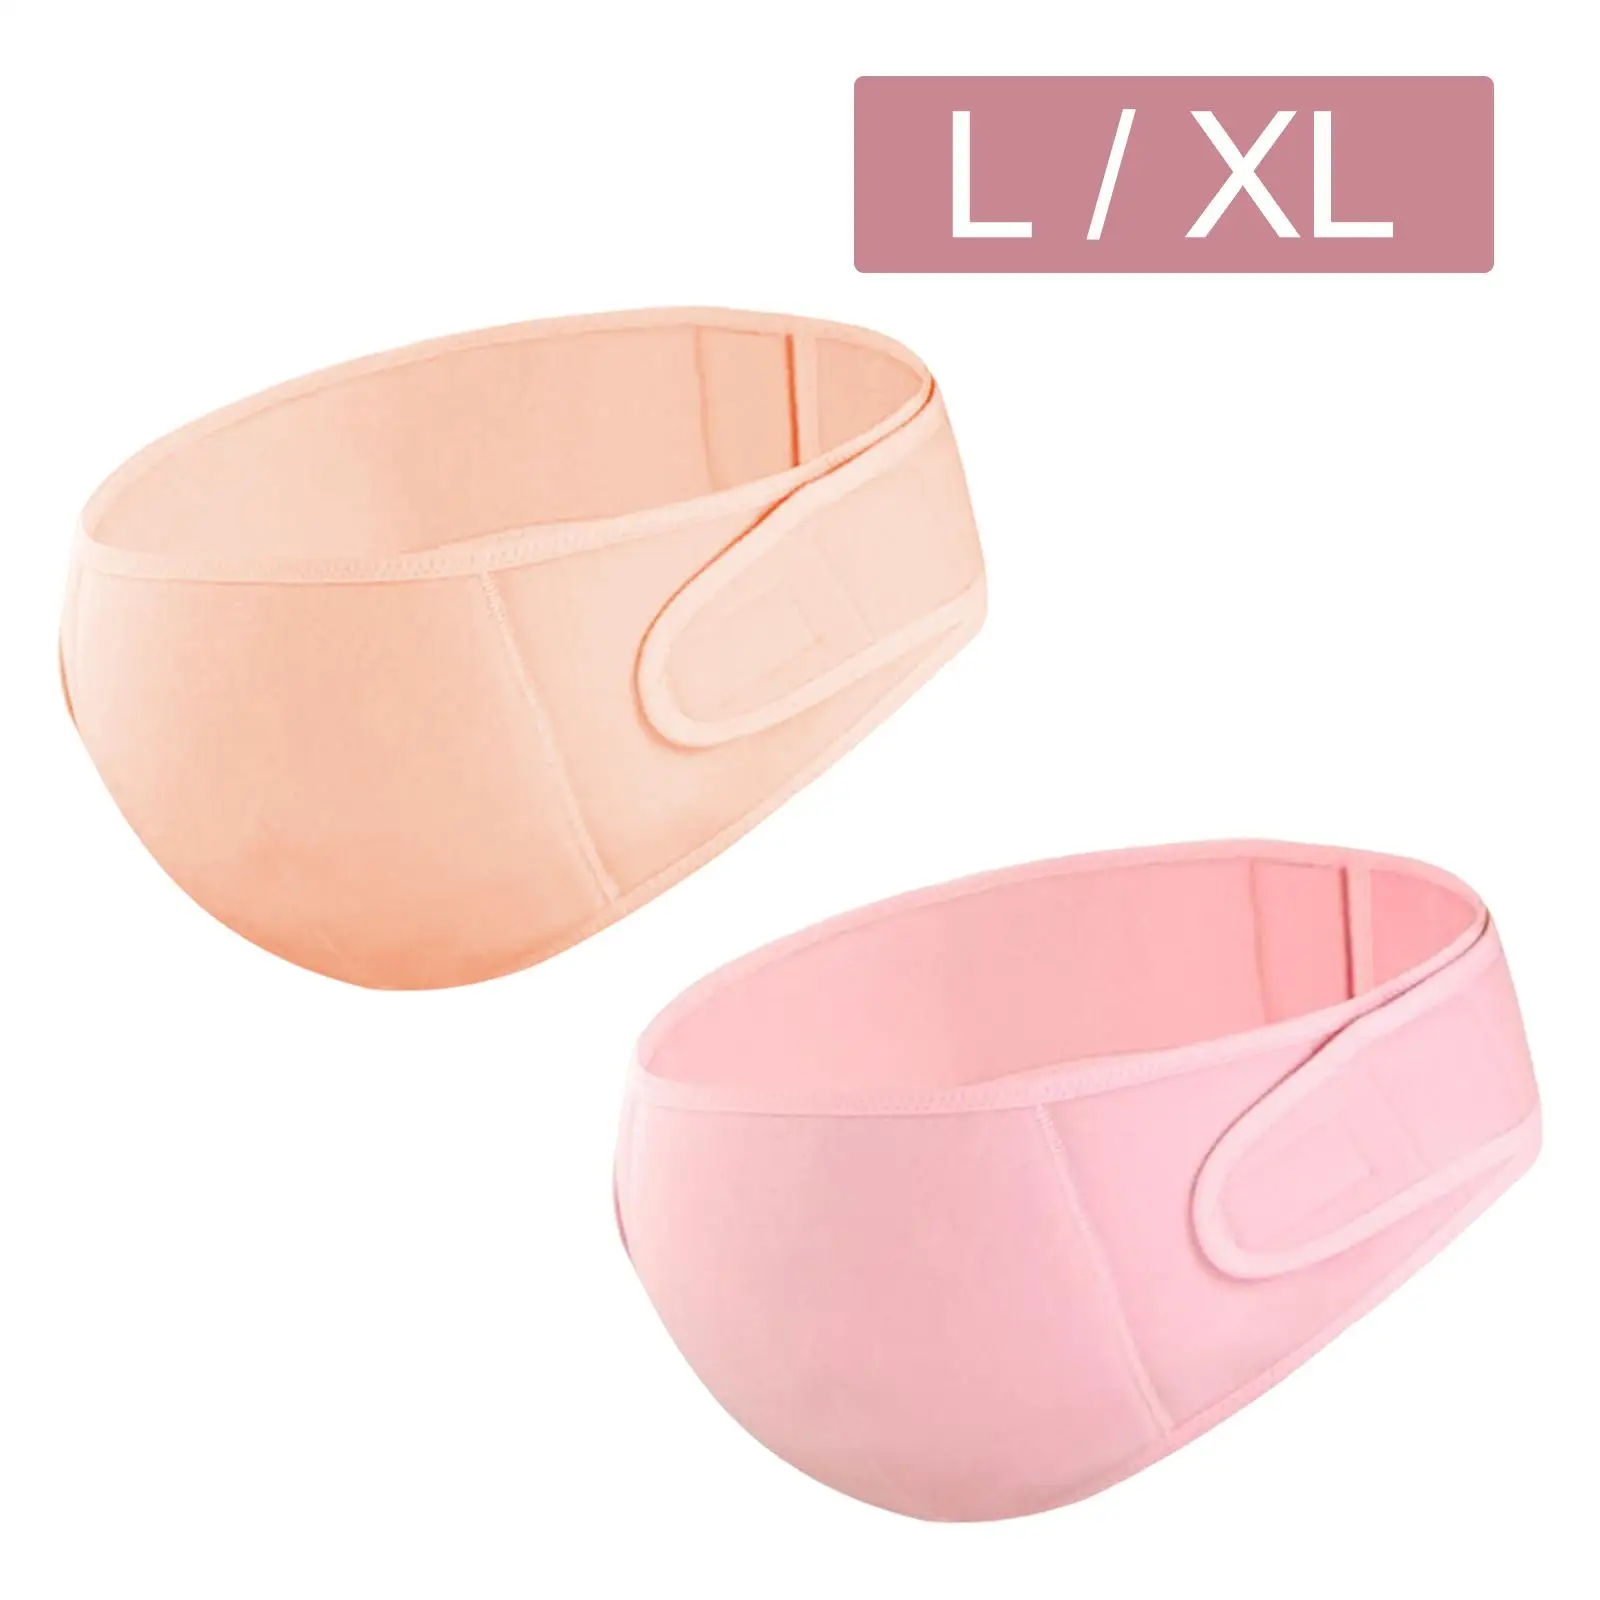 Maternity Belly Band Soft Manage Discomfort & Pain Lightweight Pregnancy Support Brace for Abdominal Pelvic Hip Pregnant Women